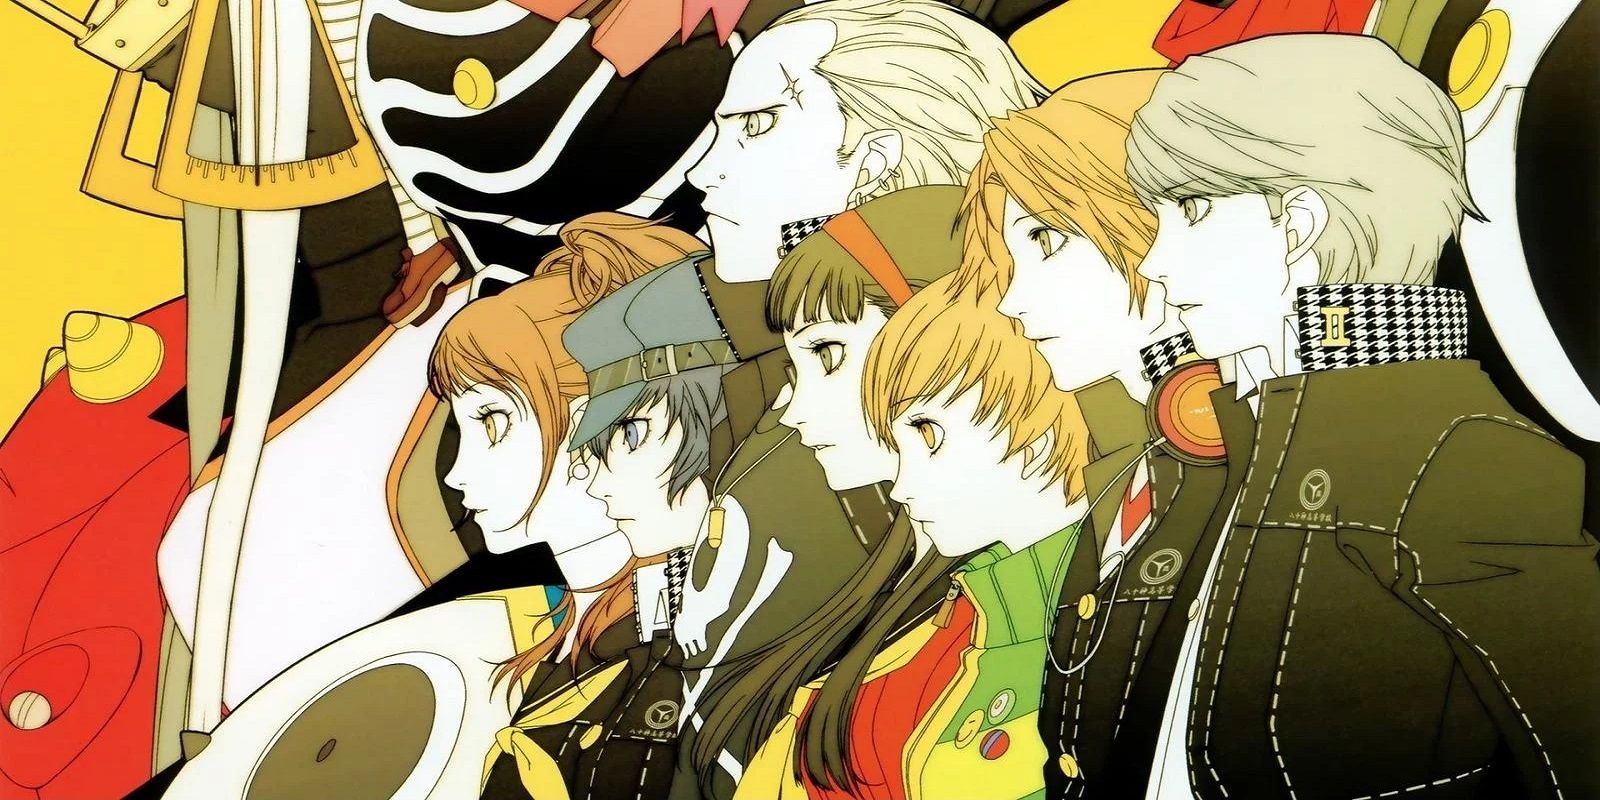 Persona 4 cast lined up next to each other and looking into the distance